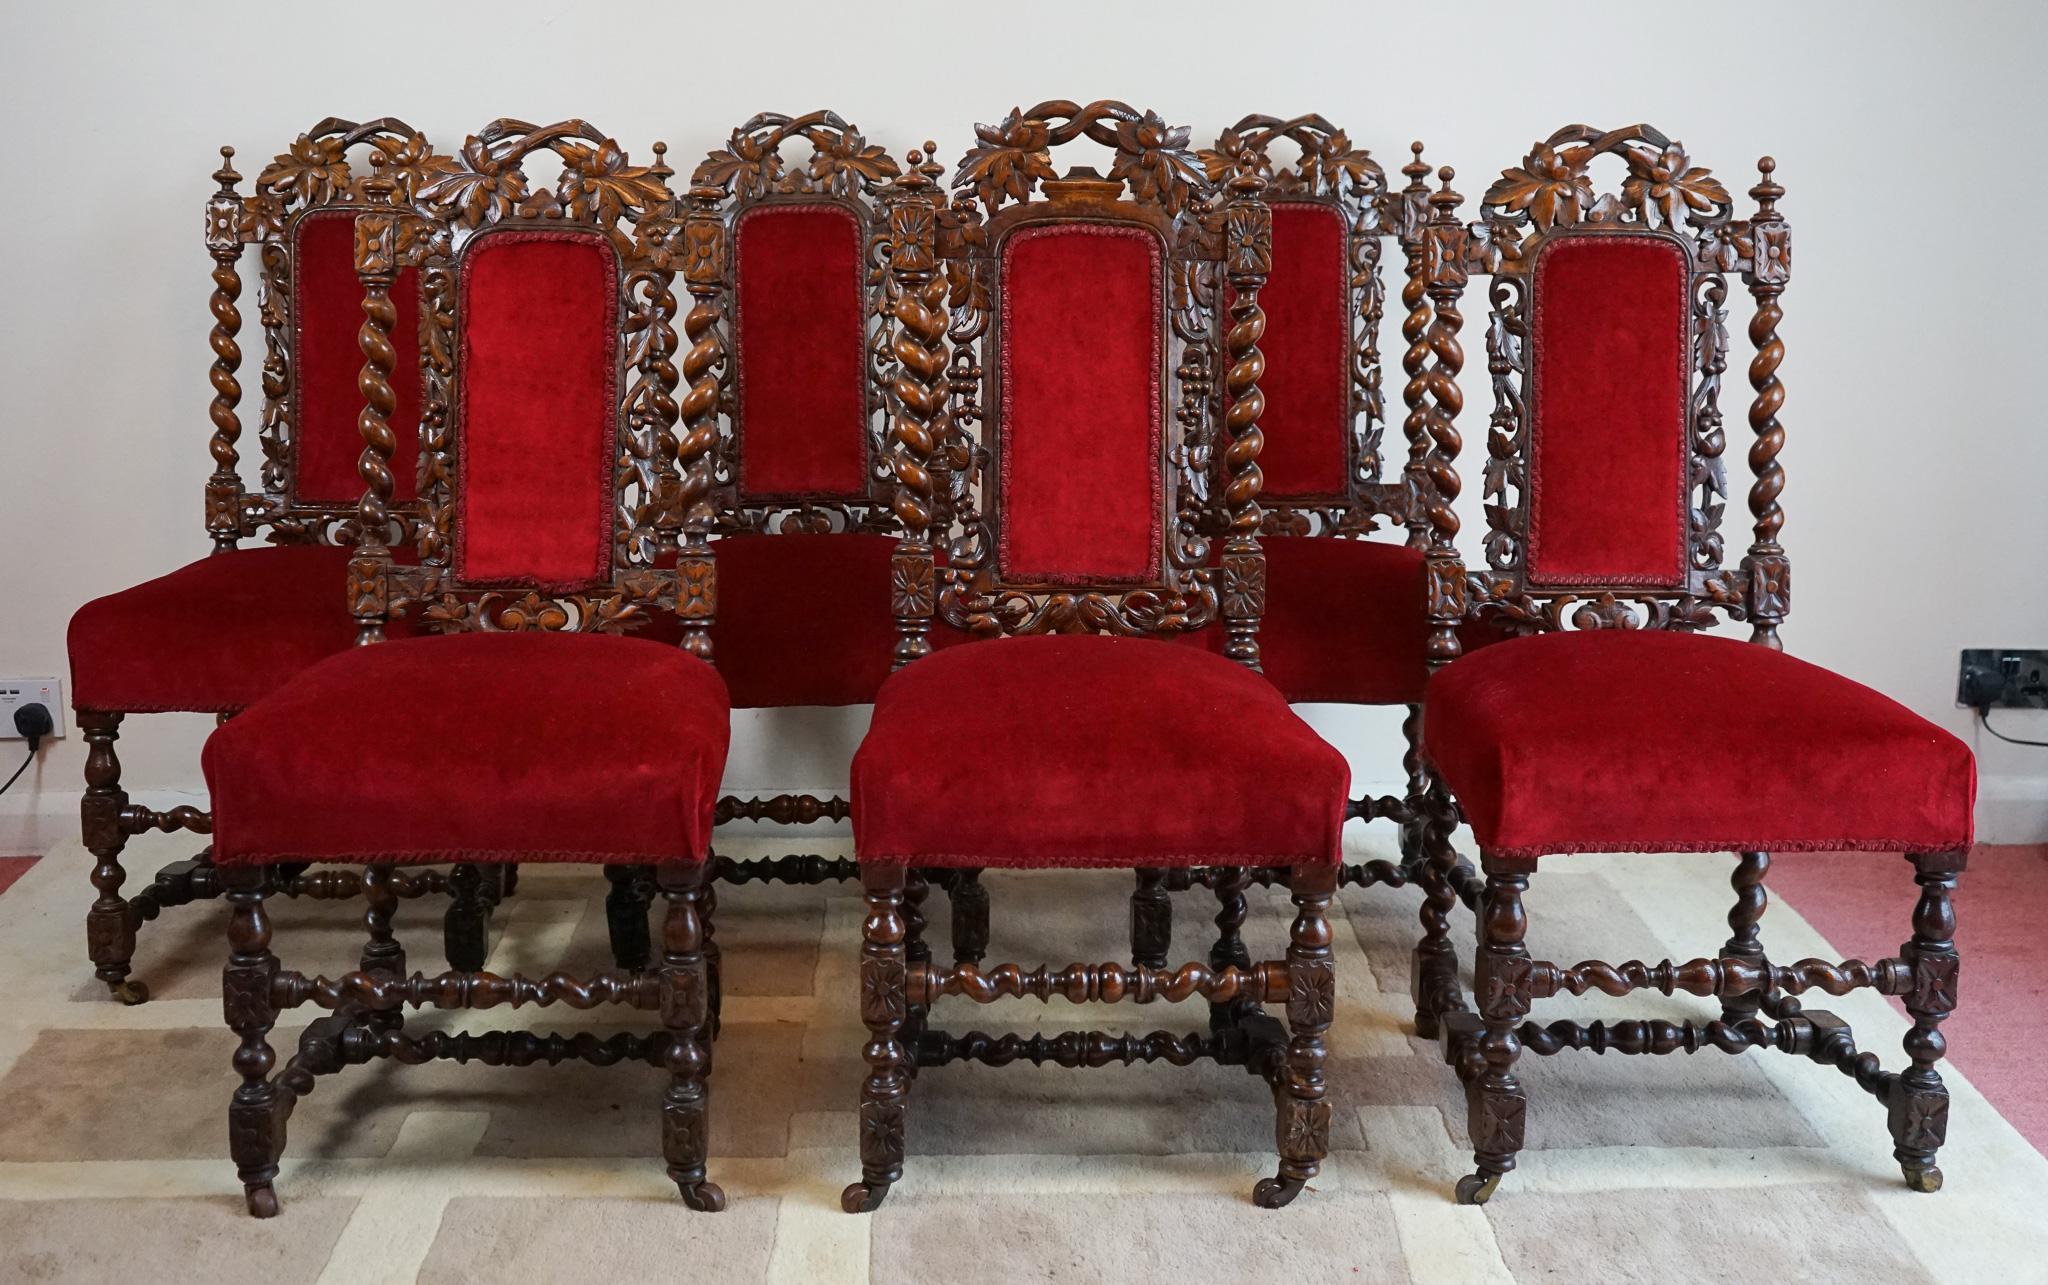 We are delight to offer for sell this superb Victorian heavily carved oak Jacobean style high back dining chairs the seats and backs upholstered in red material and filled with horse hair . We date this fantastic set of dinning chairs between